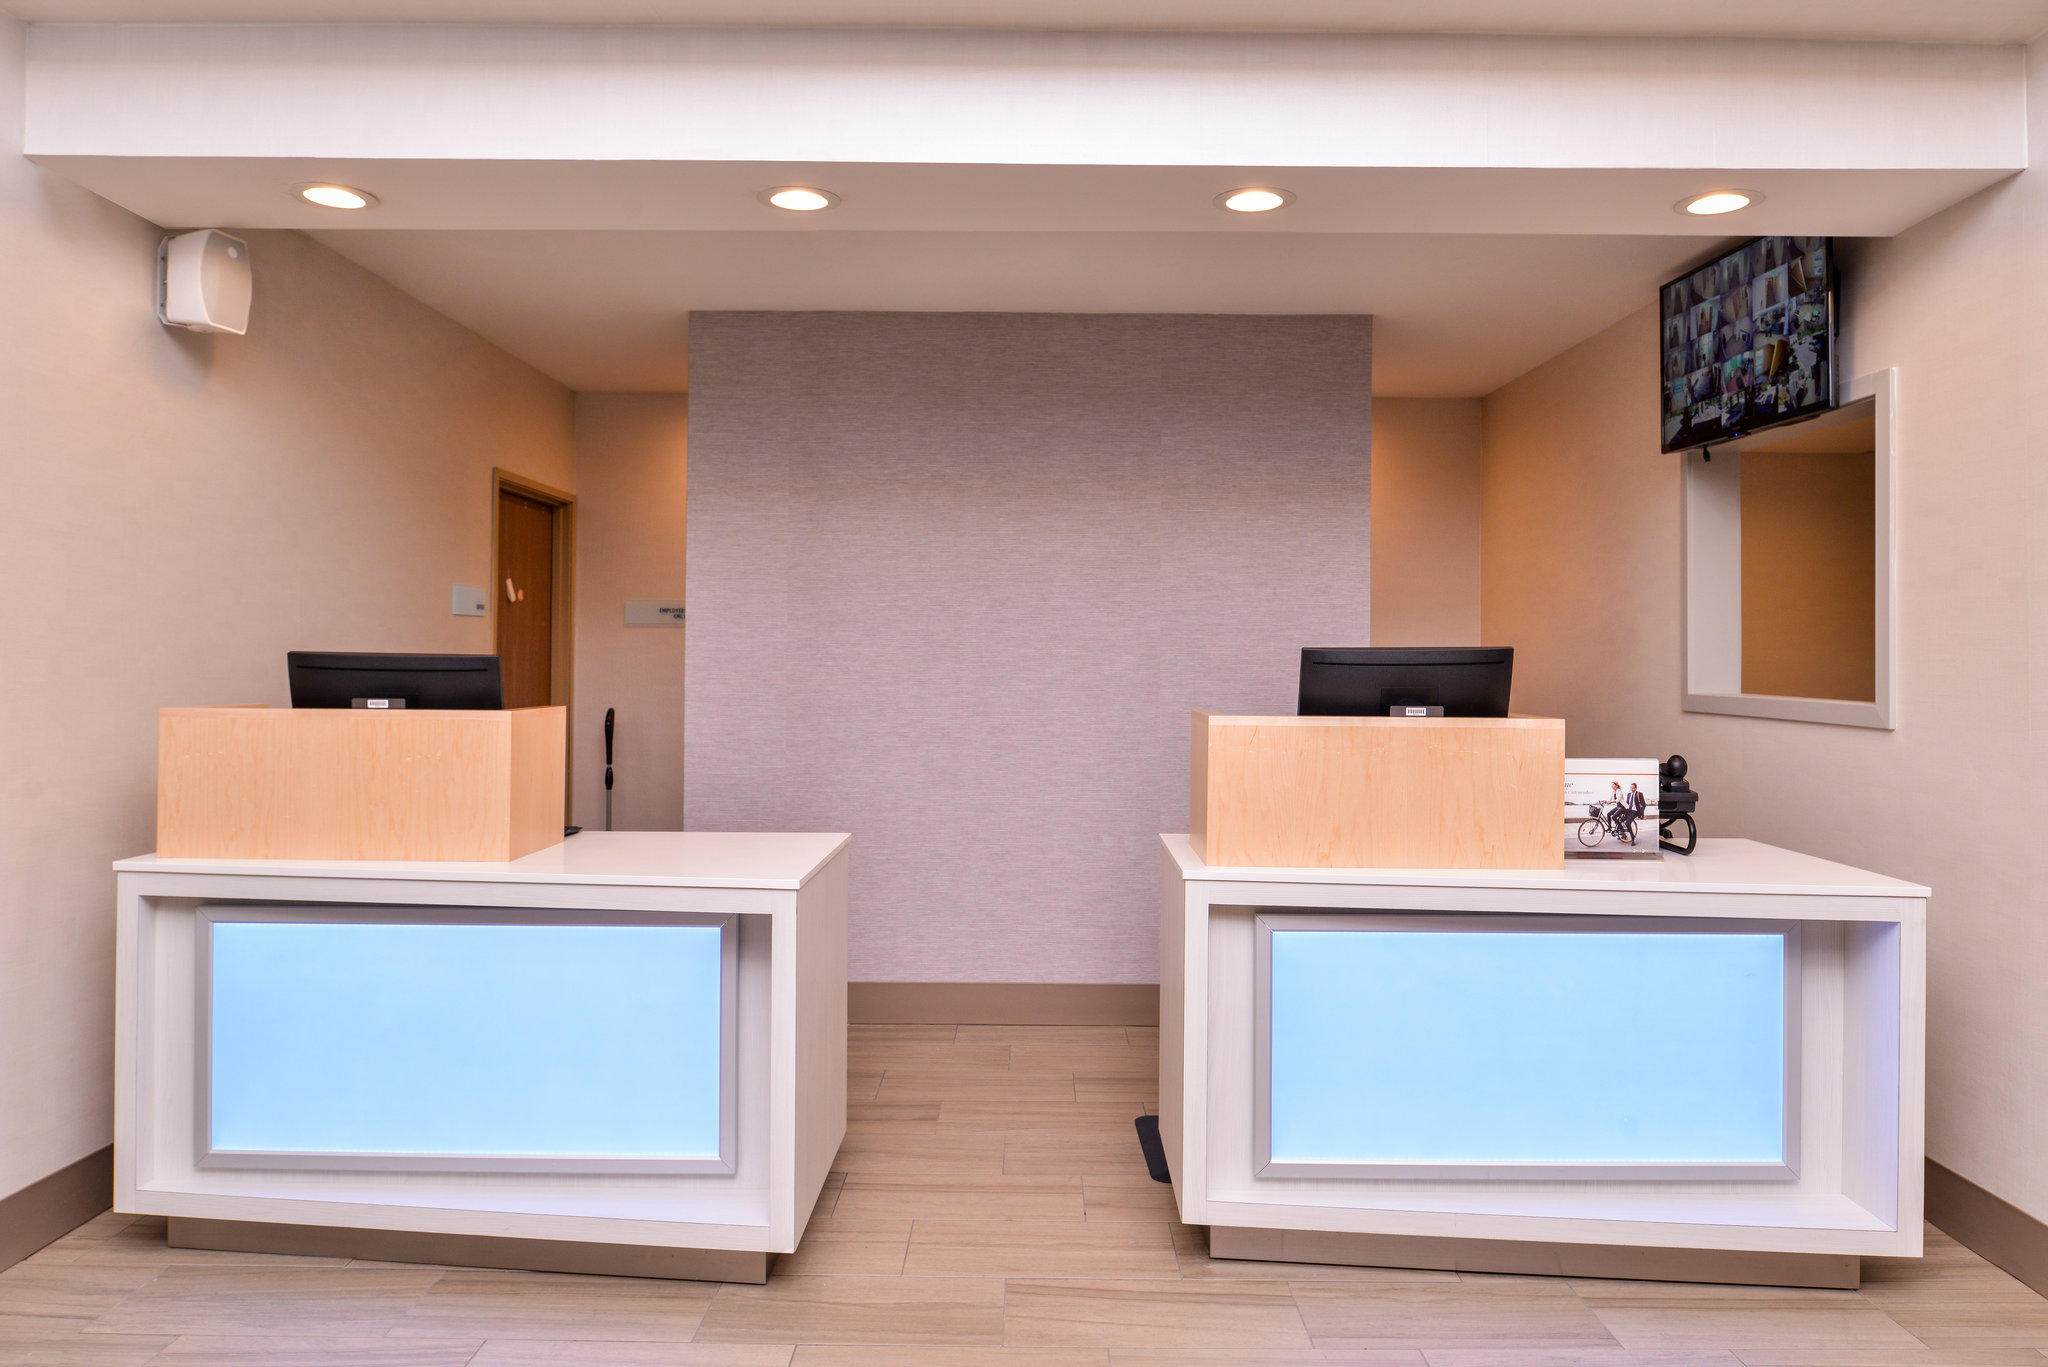 Holiday Inn Express & Suites Lacey - Olympia Photo